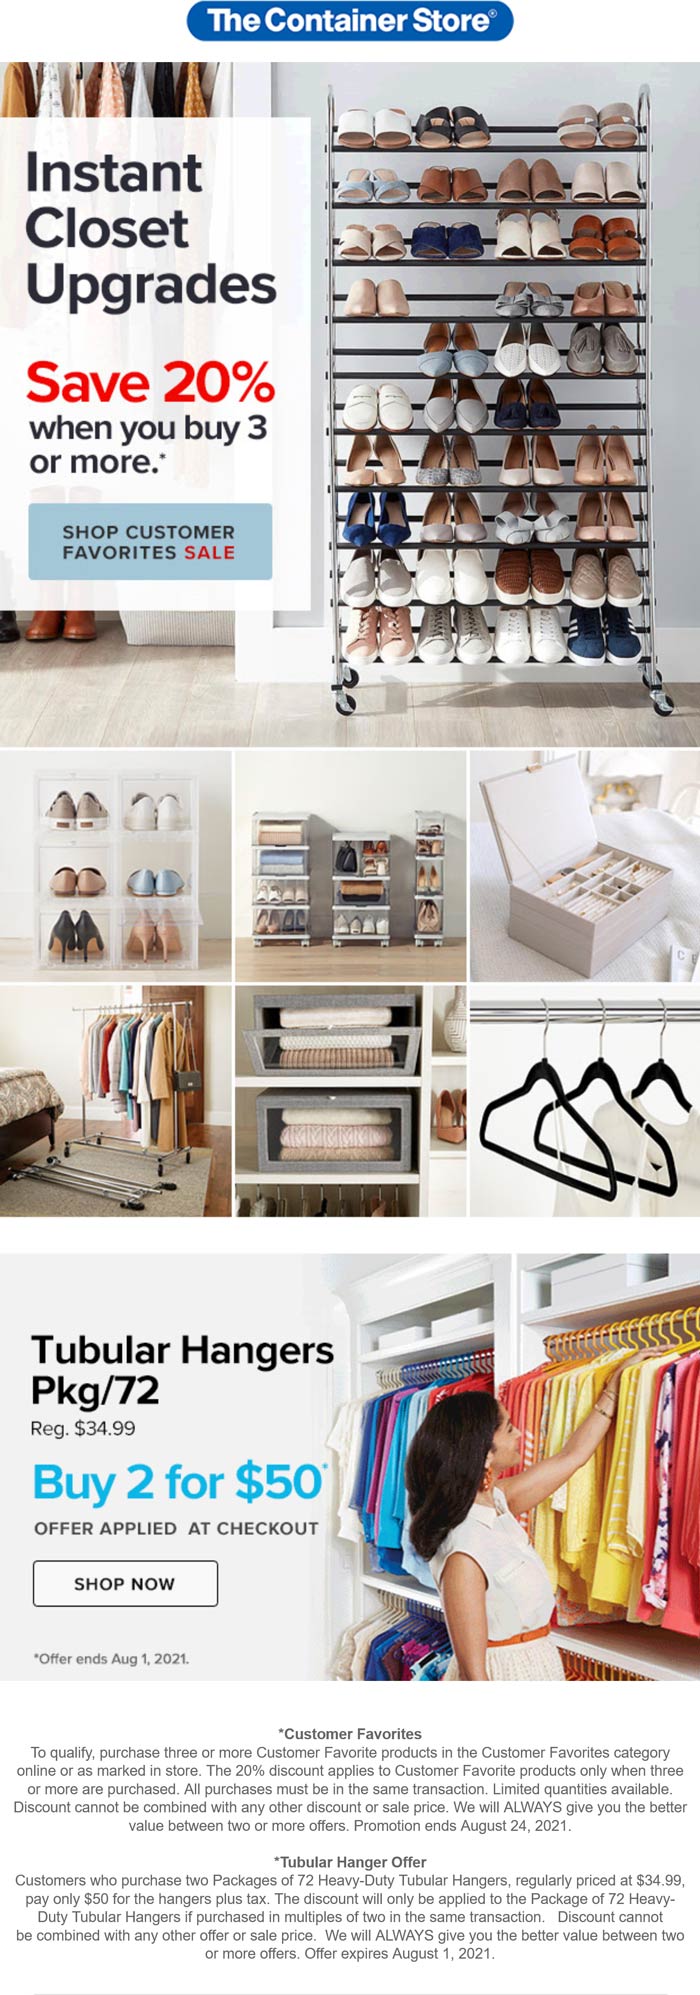 20 off 3+ customer favorites at The Container Store thecontainerstore